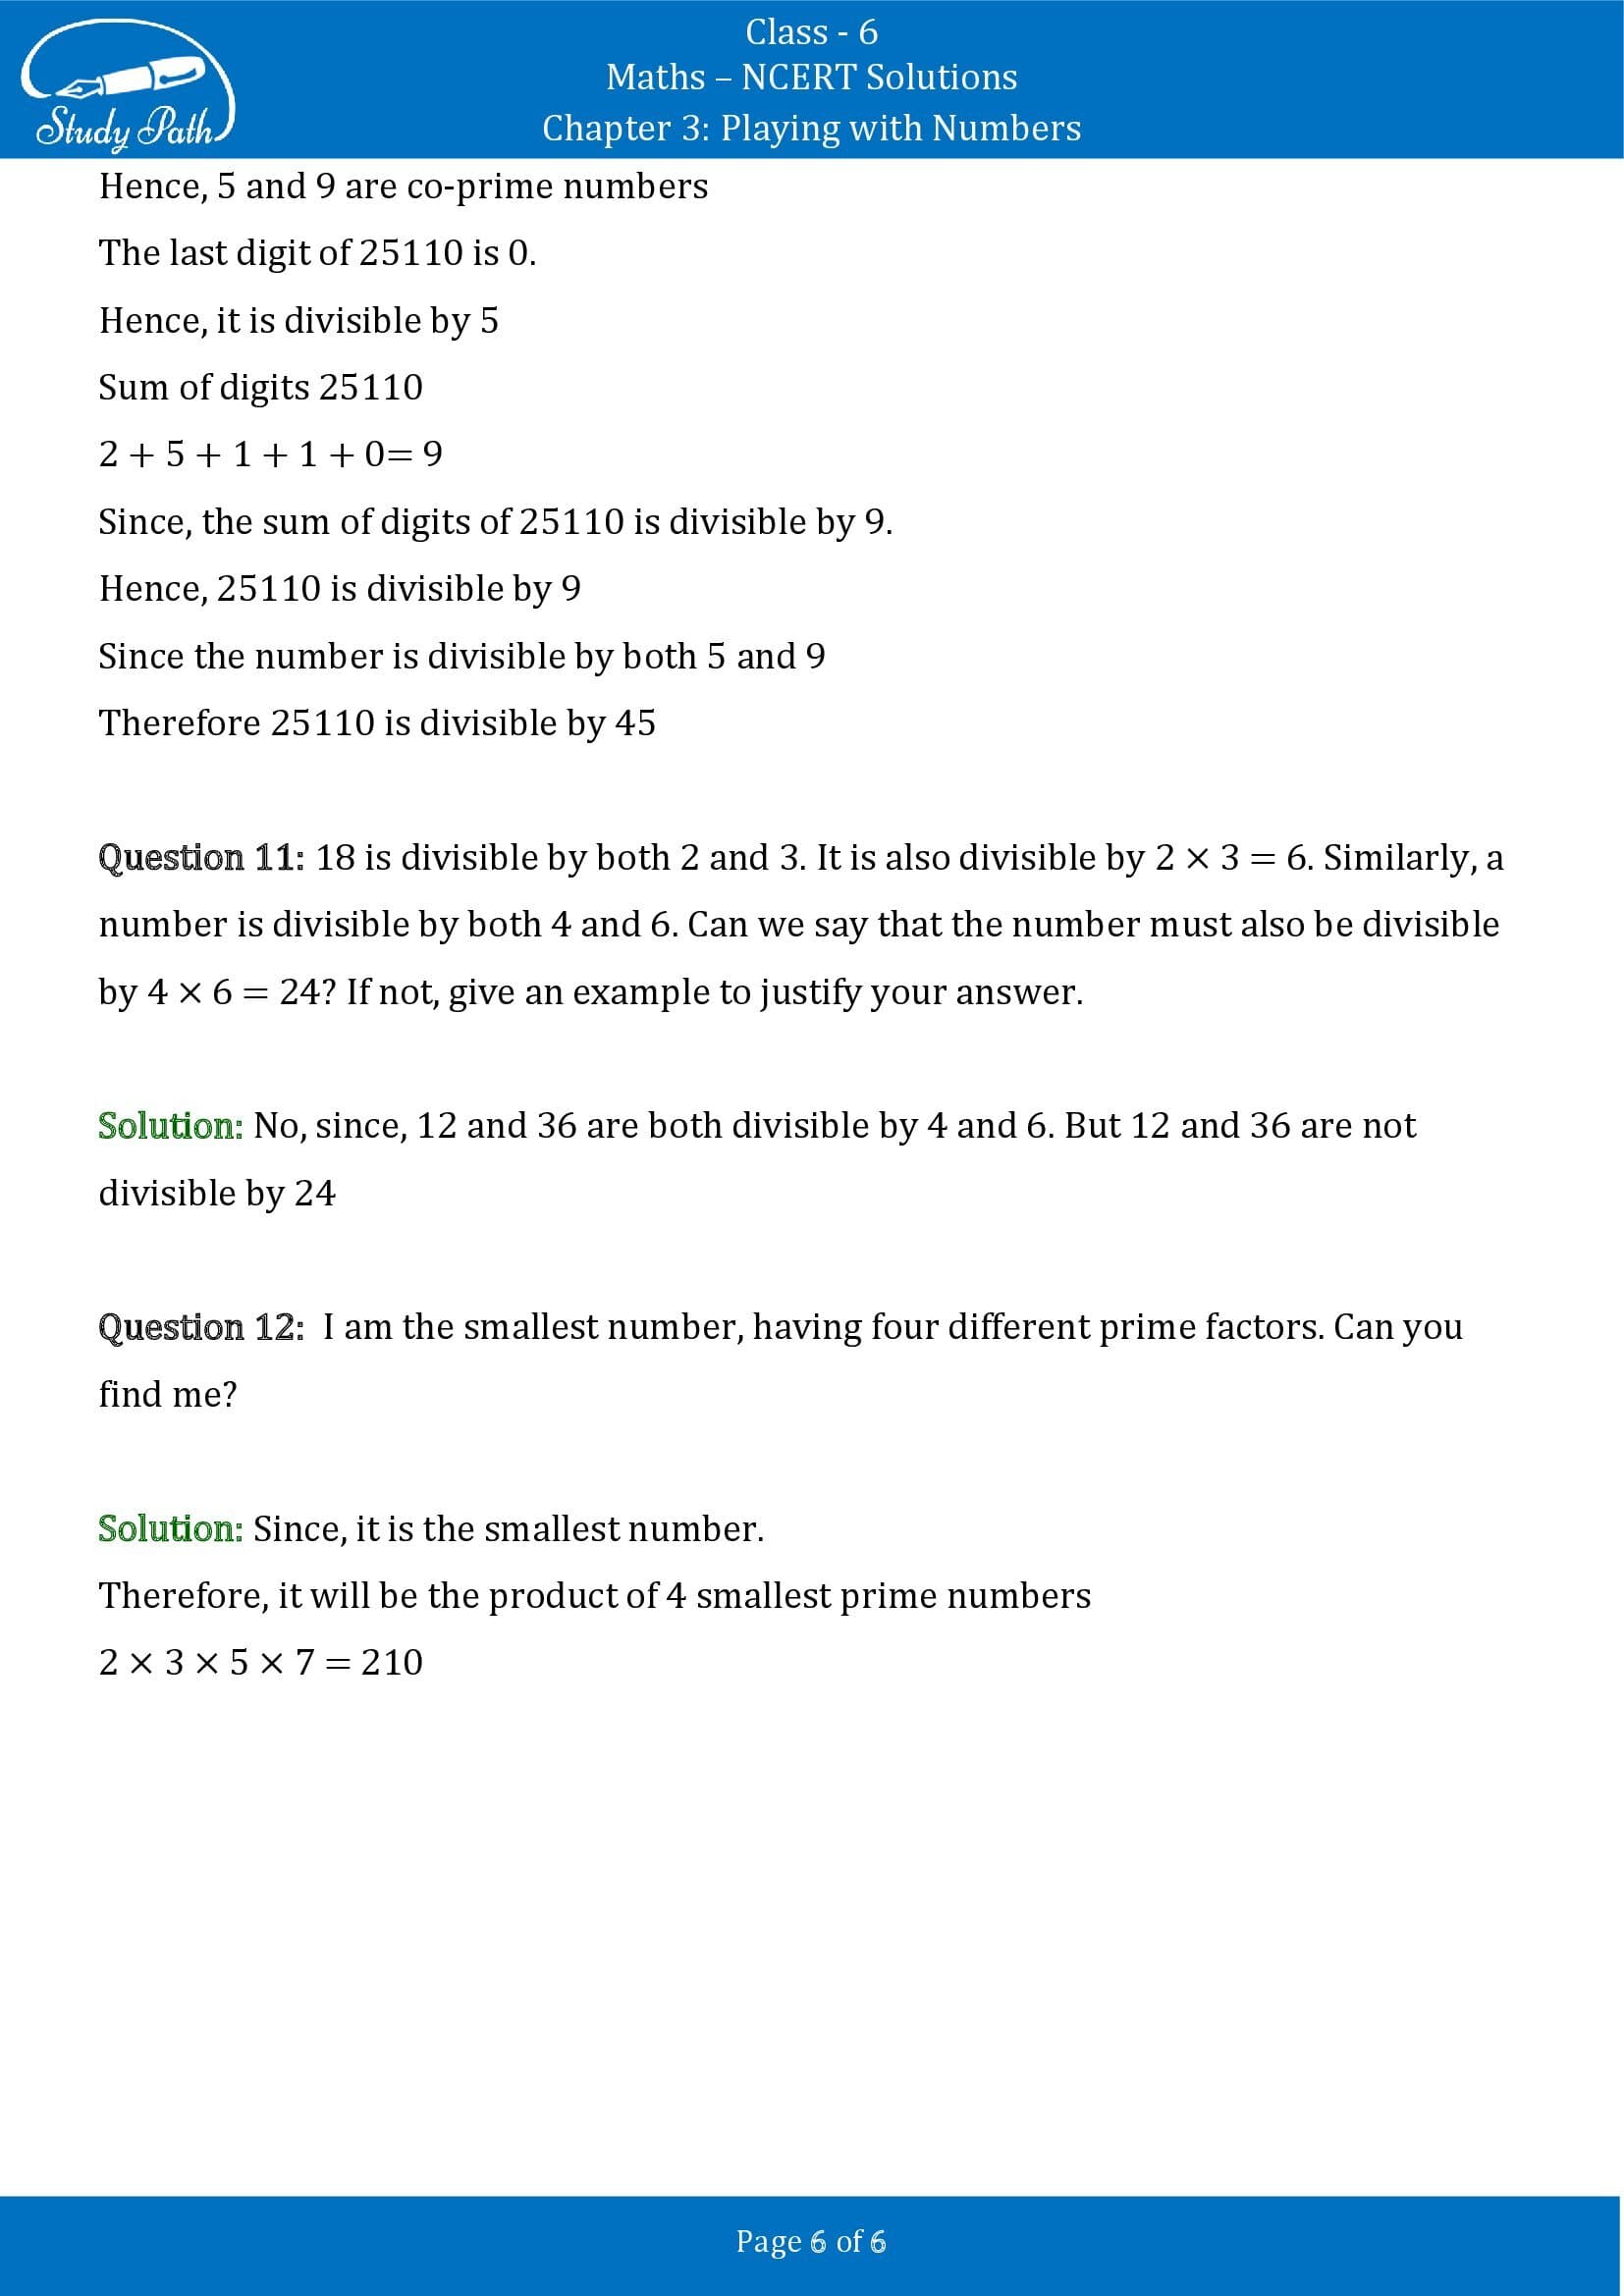 NCERT Solutions for Class 6 Maths Chapter 3 Playing with Numbers Exercise 3.5 00006